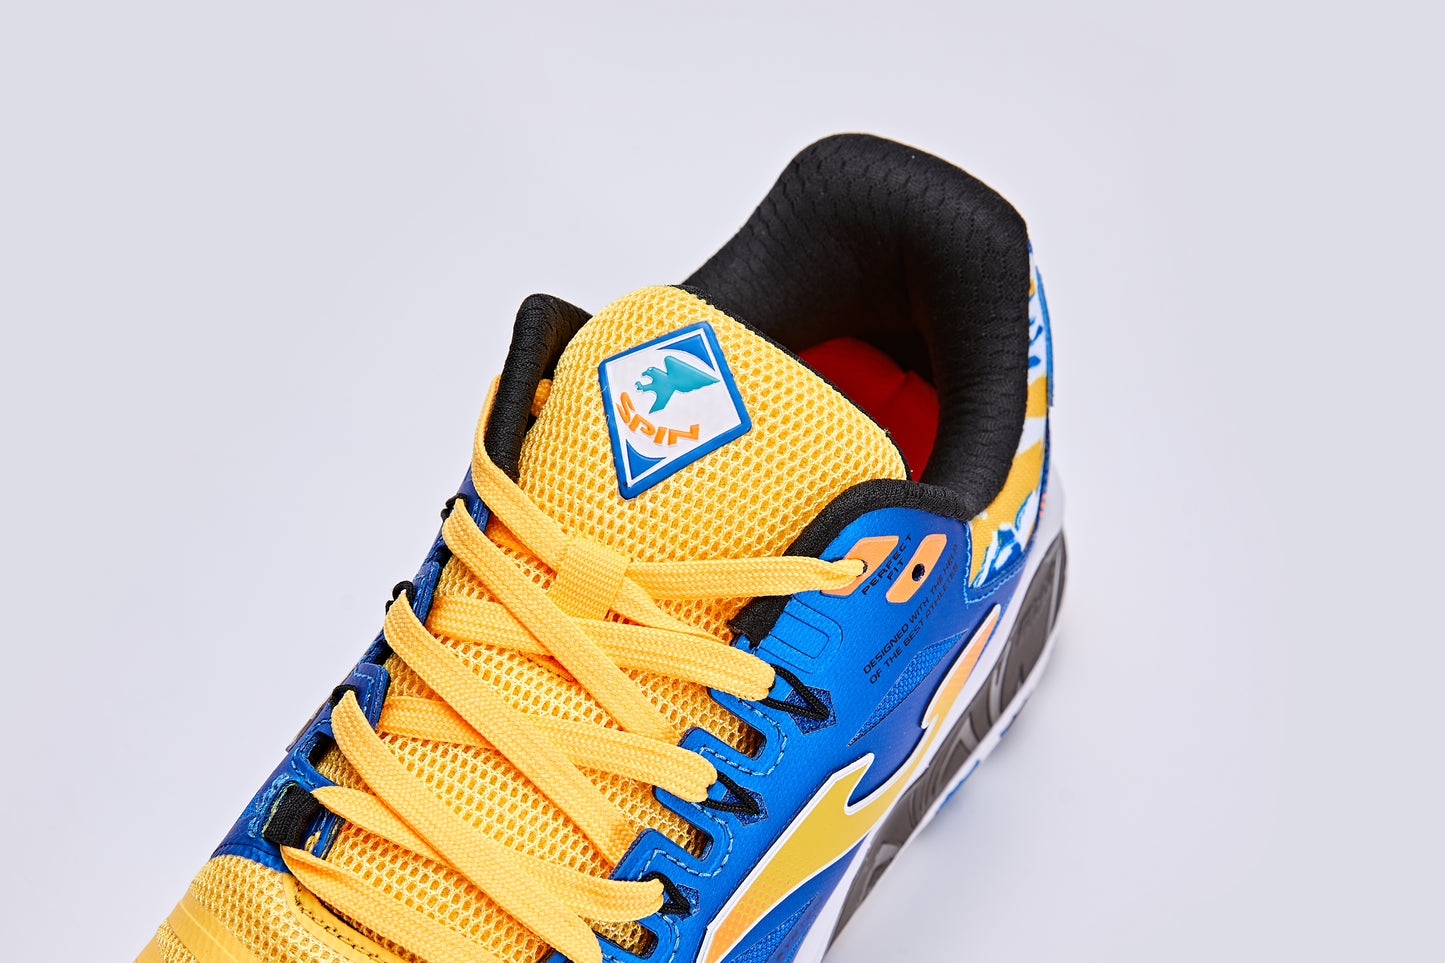 Adult paddle tennis shoes T.SPIN [blue and orange]